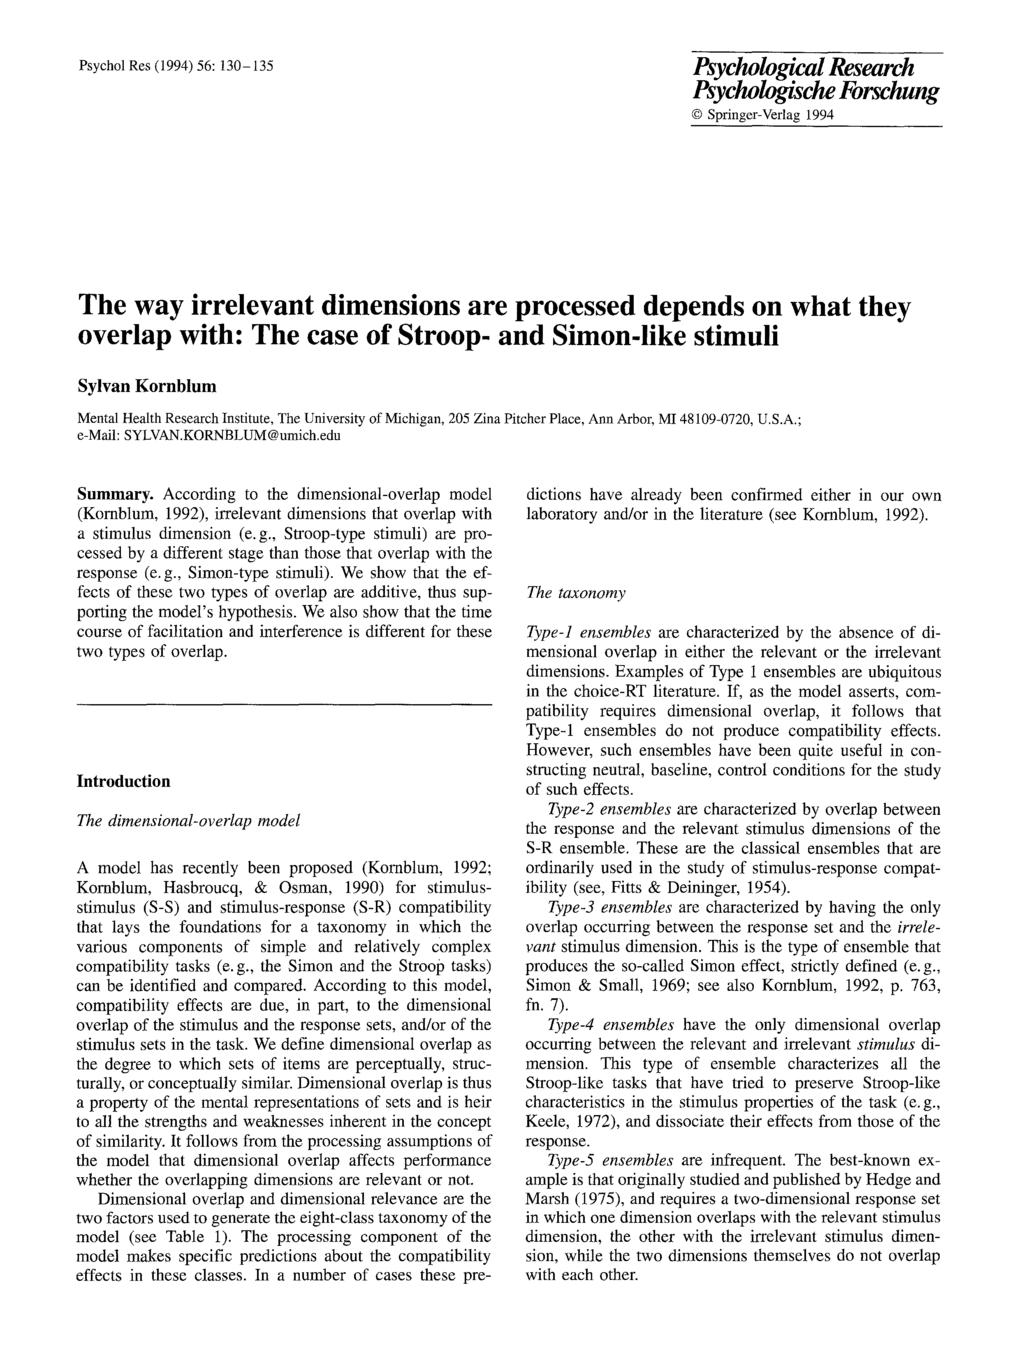 Psychol Res (1994) 56: 130-135 Psychological Research Psychologische Forschung Springer-Verlag 1994 The way irrelevant dimensions are processed depends on what they overlap with: The case of Stroop-